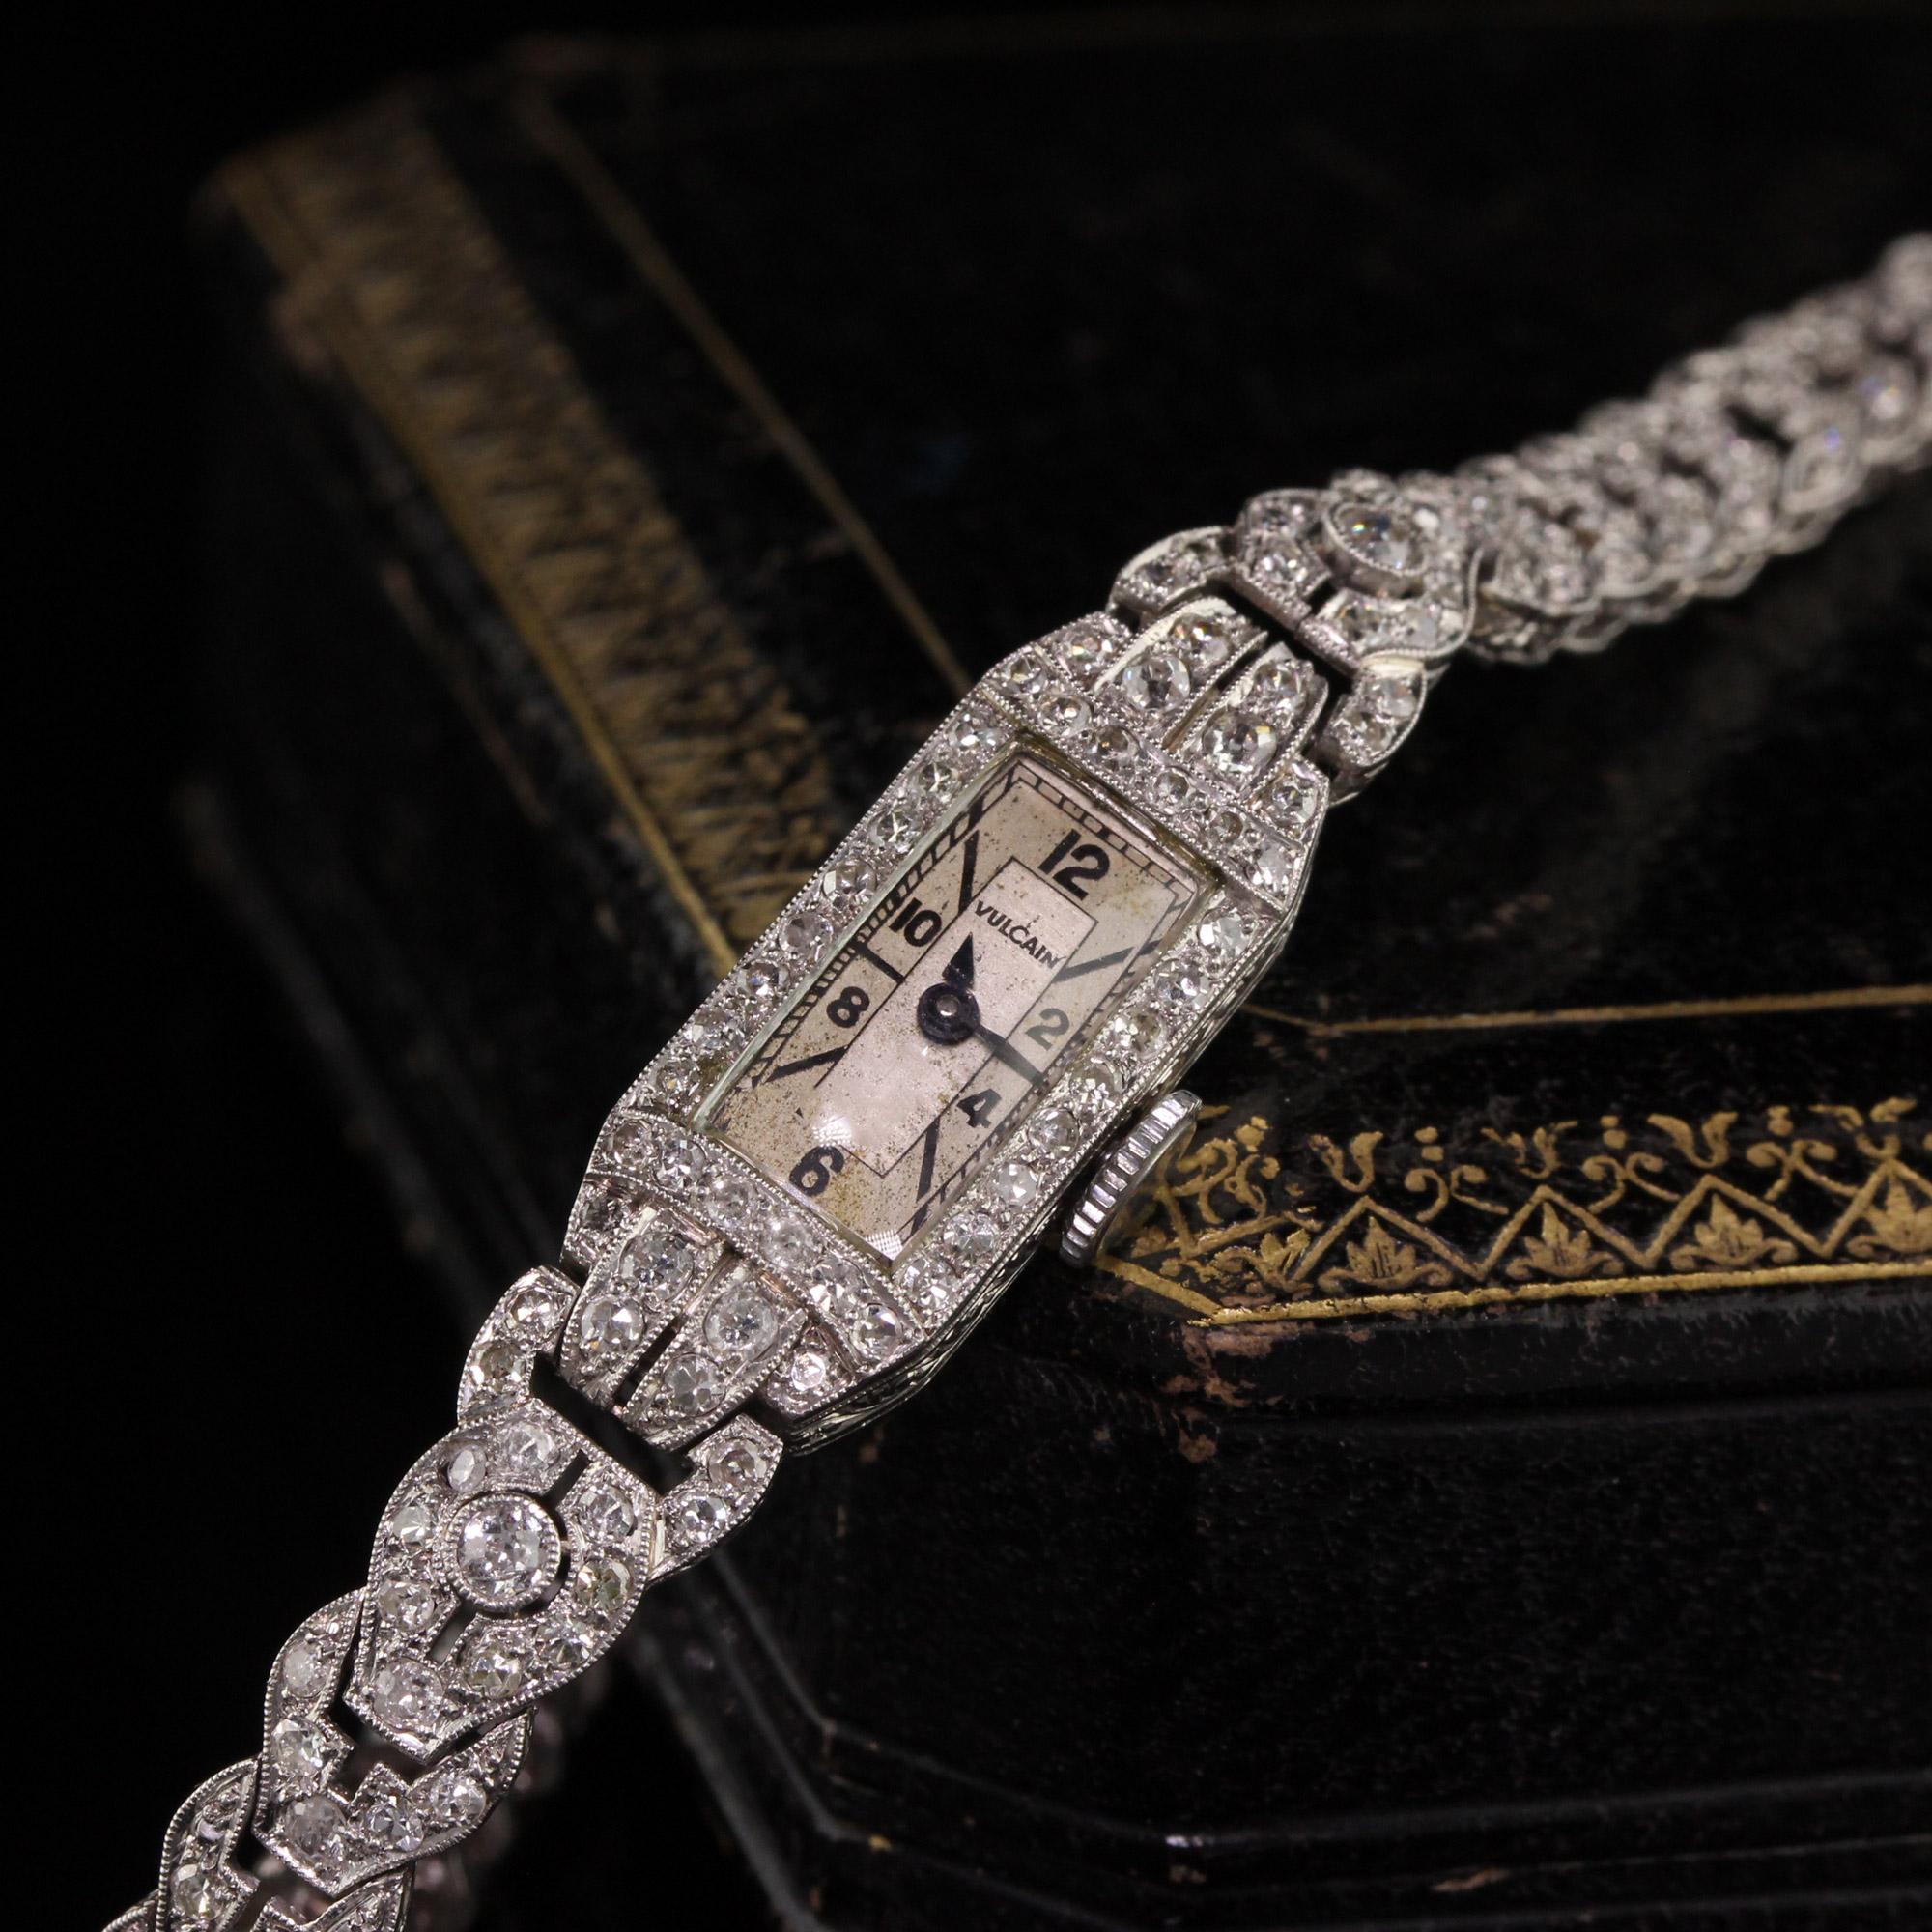 Stunning Art Deco Platinum Diamond Vulcain watch. The whole watch is completely covered in diamonds. 

Metal: Platinum

Weight: 13.8 Grams

Total Diamond Weight: Approximately 3.00 CTS

Diamond Color: H

Diamond Clarity: VS2 - SI1

Measurements: 0.5